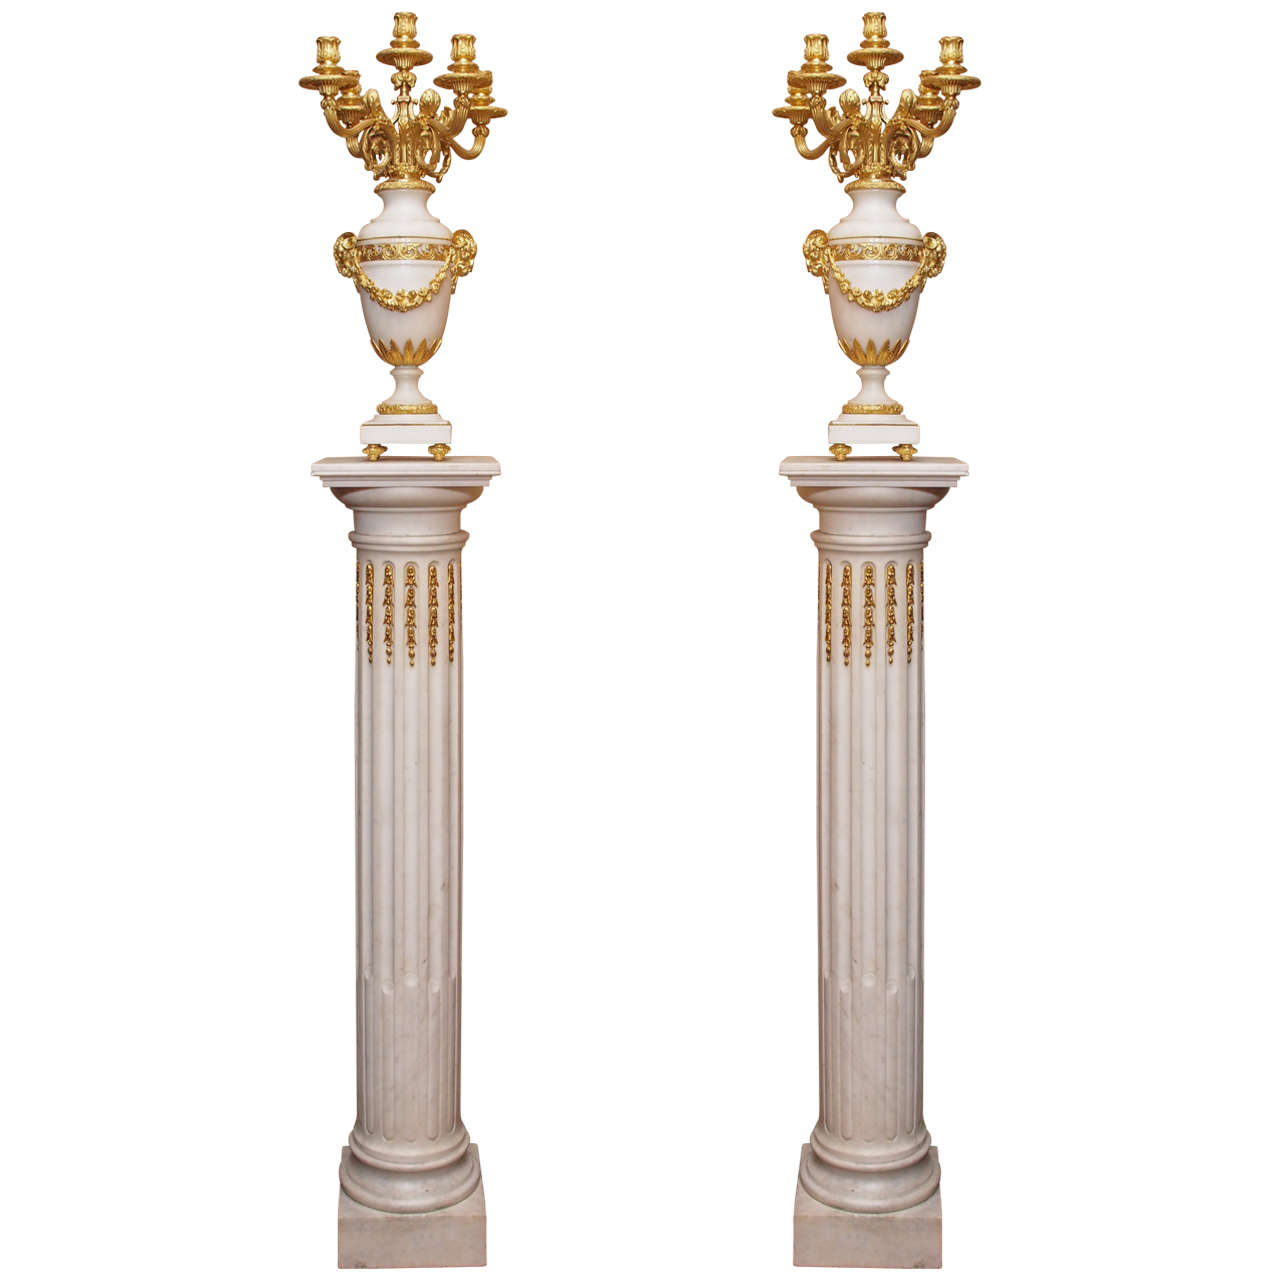 Pair of Antique Carrara Marble and Ormolu Pedestals and Urns circa 1850 For Sale